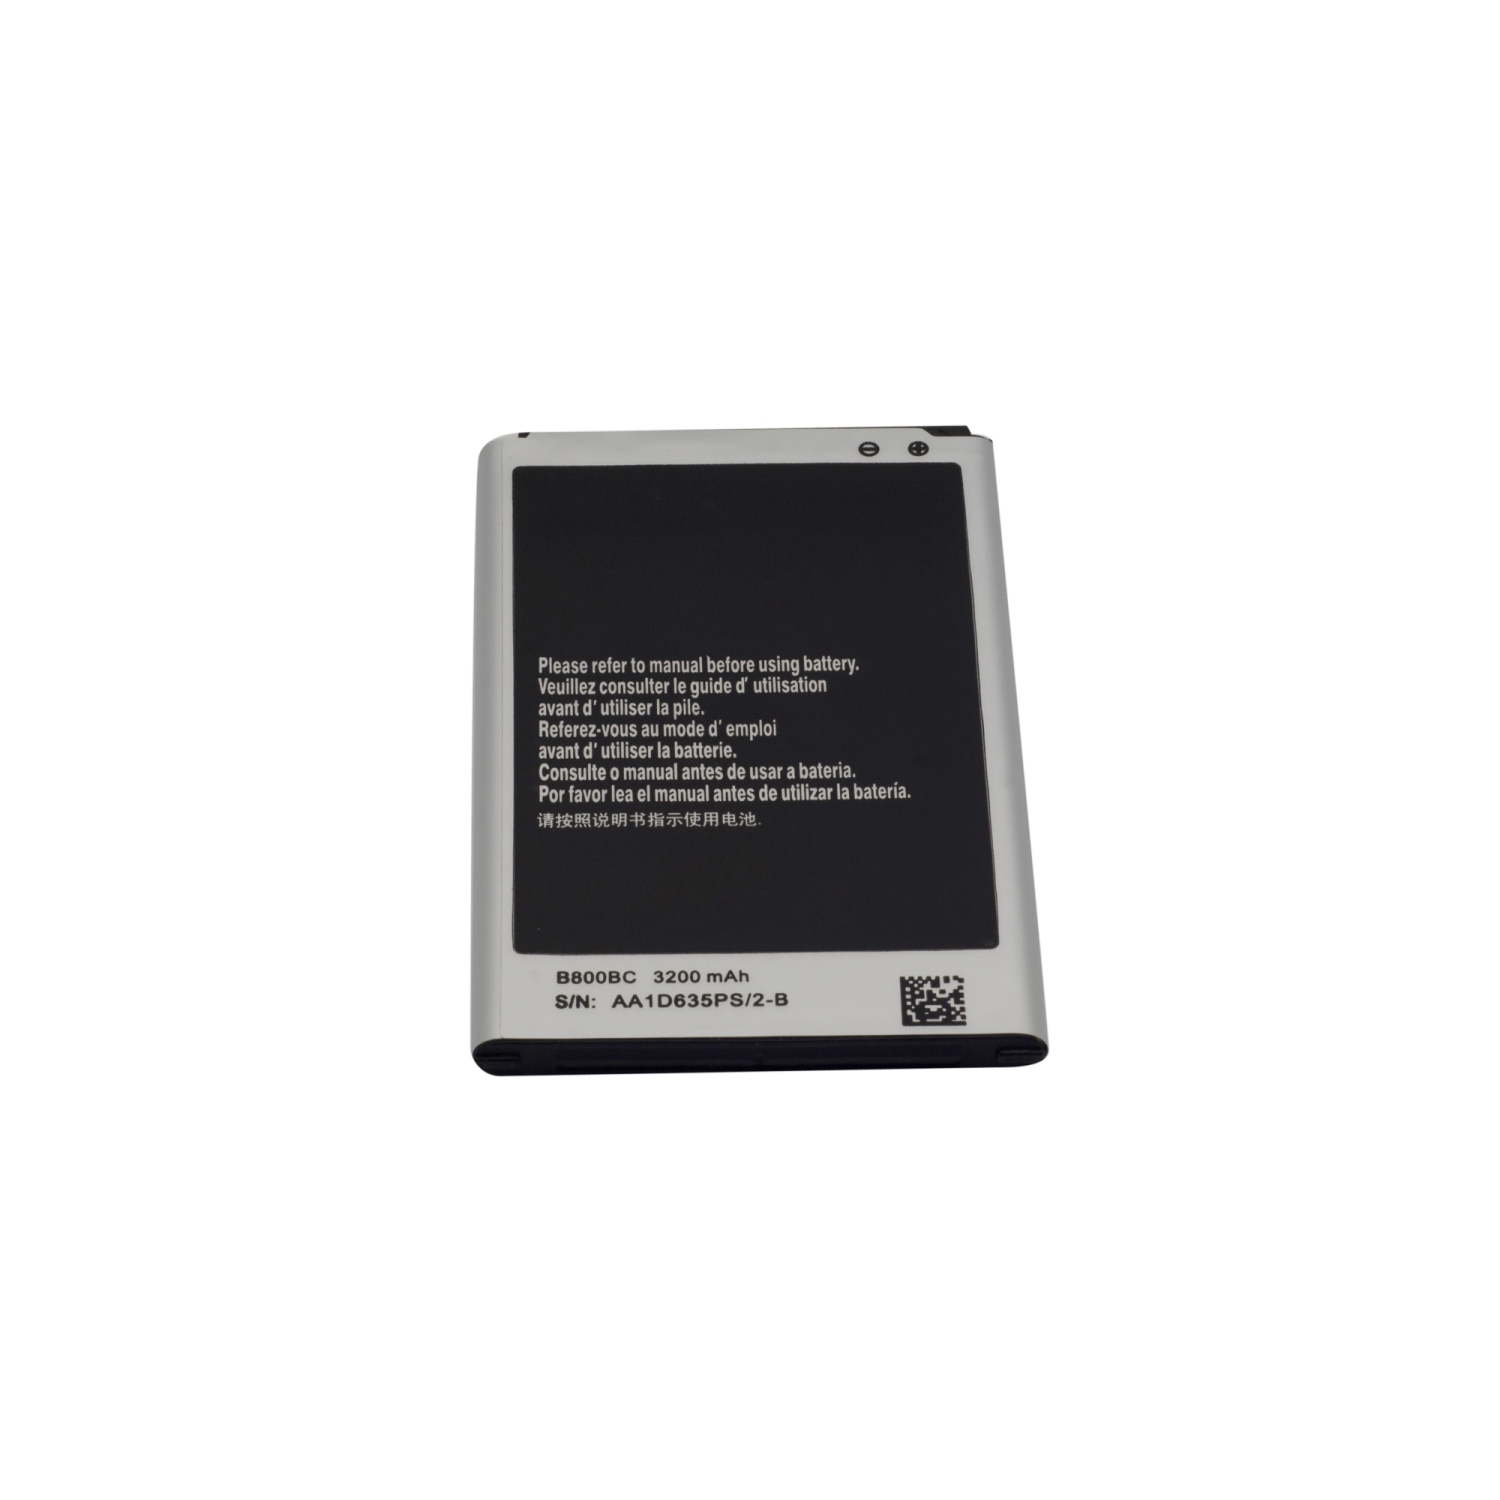 REPLACEMENT BATTERY 3200mAh EB-B800BEBECWW for the SAMSUNG GALAXY NOTE 3